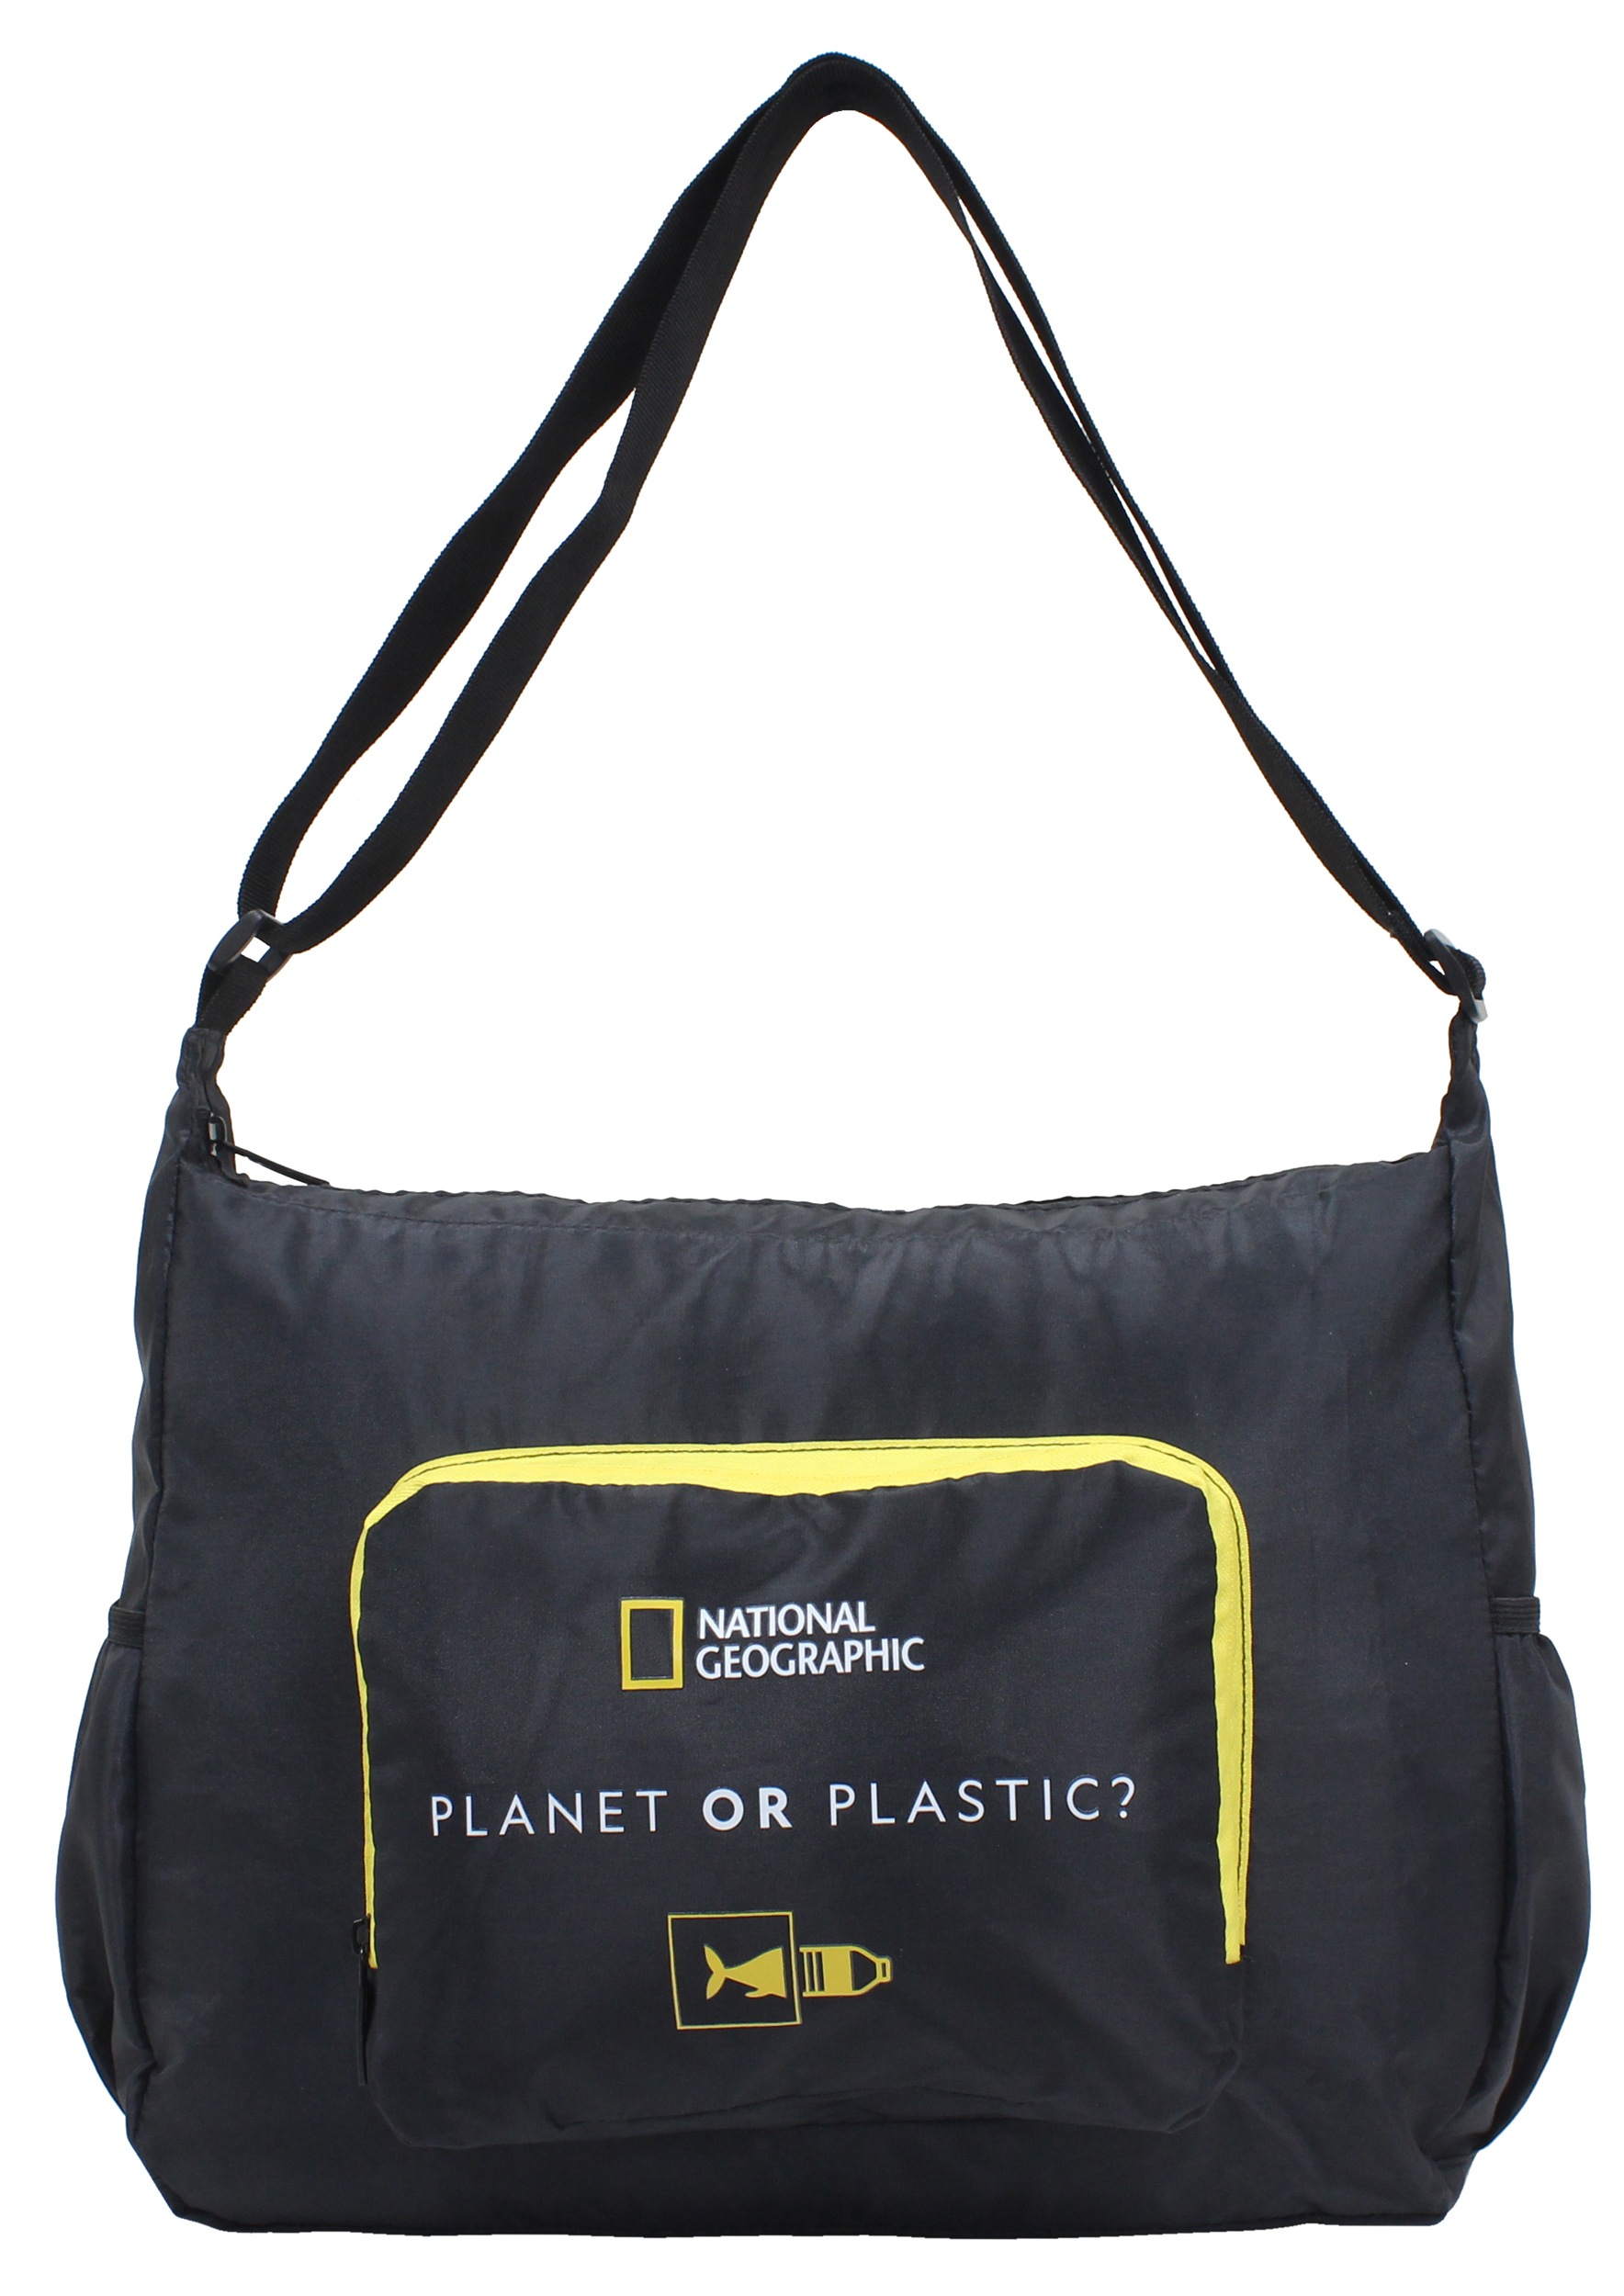 NATIONAL GEOGRAPHIC Schultertasche "Foldable", aus recyceltem Polyester